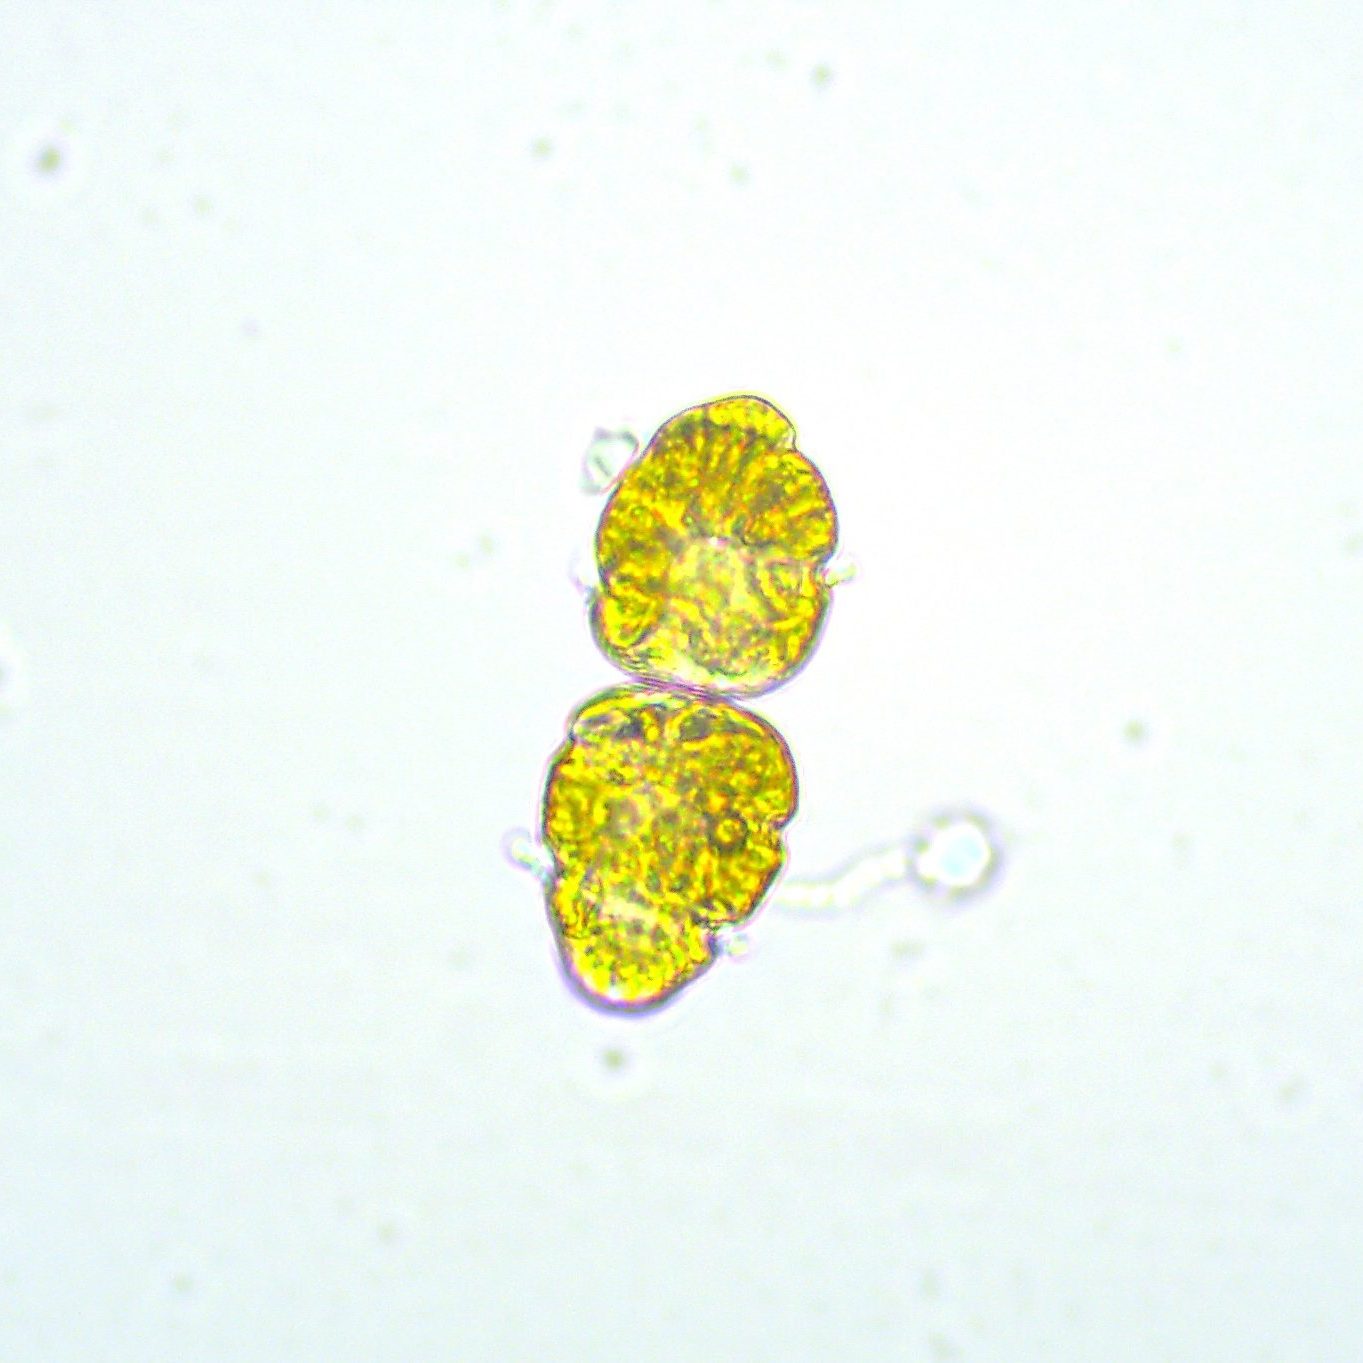 Light microscopy image of <i>M. polykrikoides</i>. Image courtesy of C. Heil, taken during MERHAB course on the Identification of HABs.